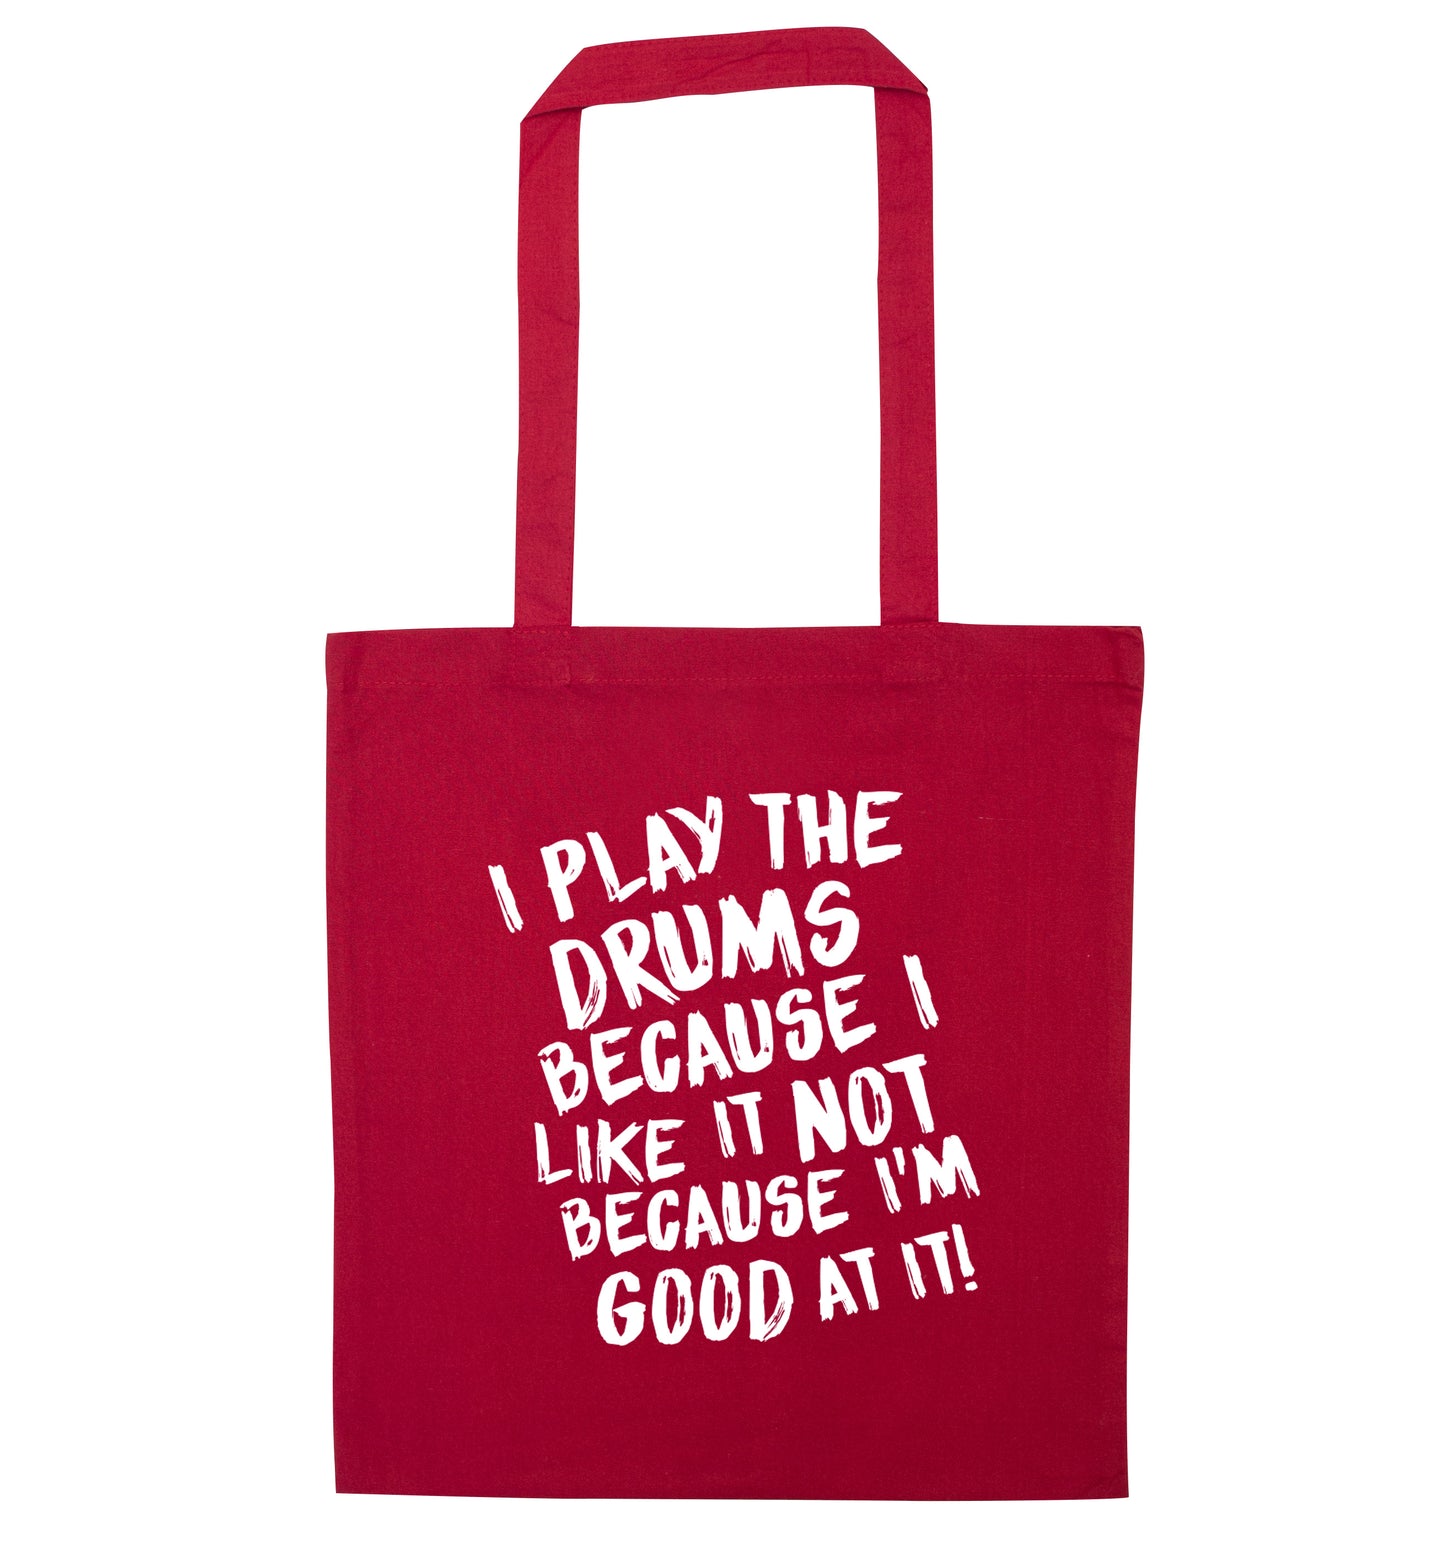 I play the drums because I like it not because I'm good at it red tote bag